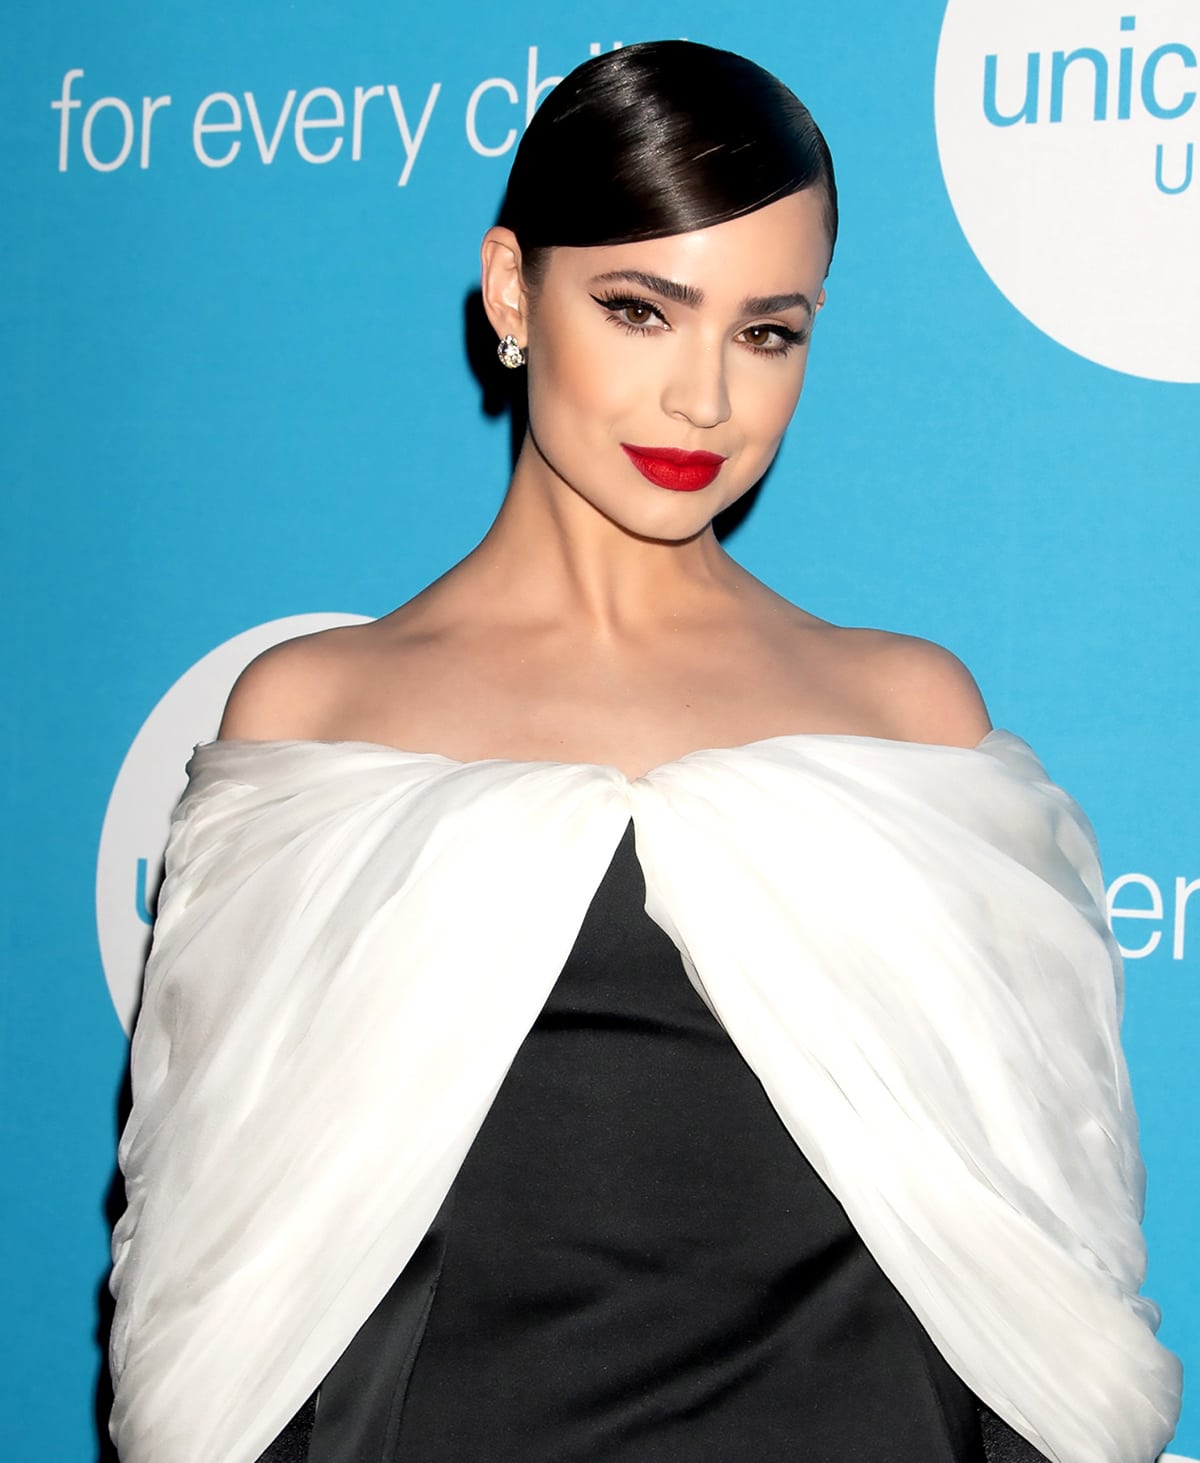 Sofia Carson opts for old Hollywood glam with a side-parted bun and a swipe of bold red lipstick